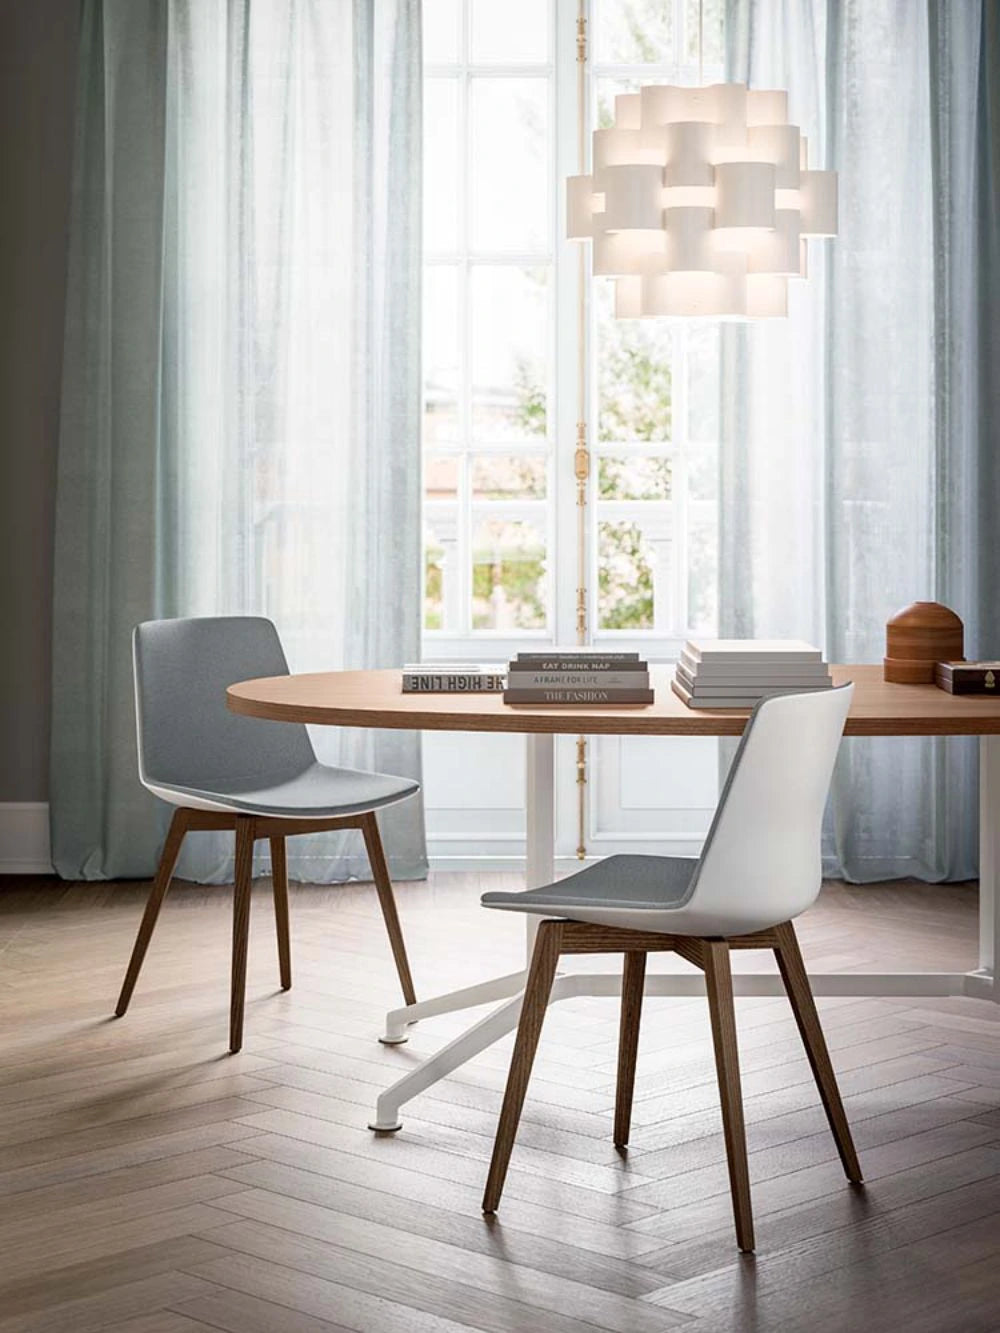 Compass Dining Chair In White With Oval Shaped Table